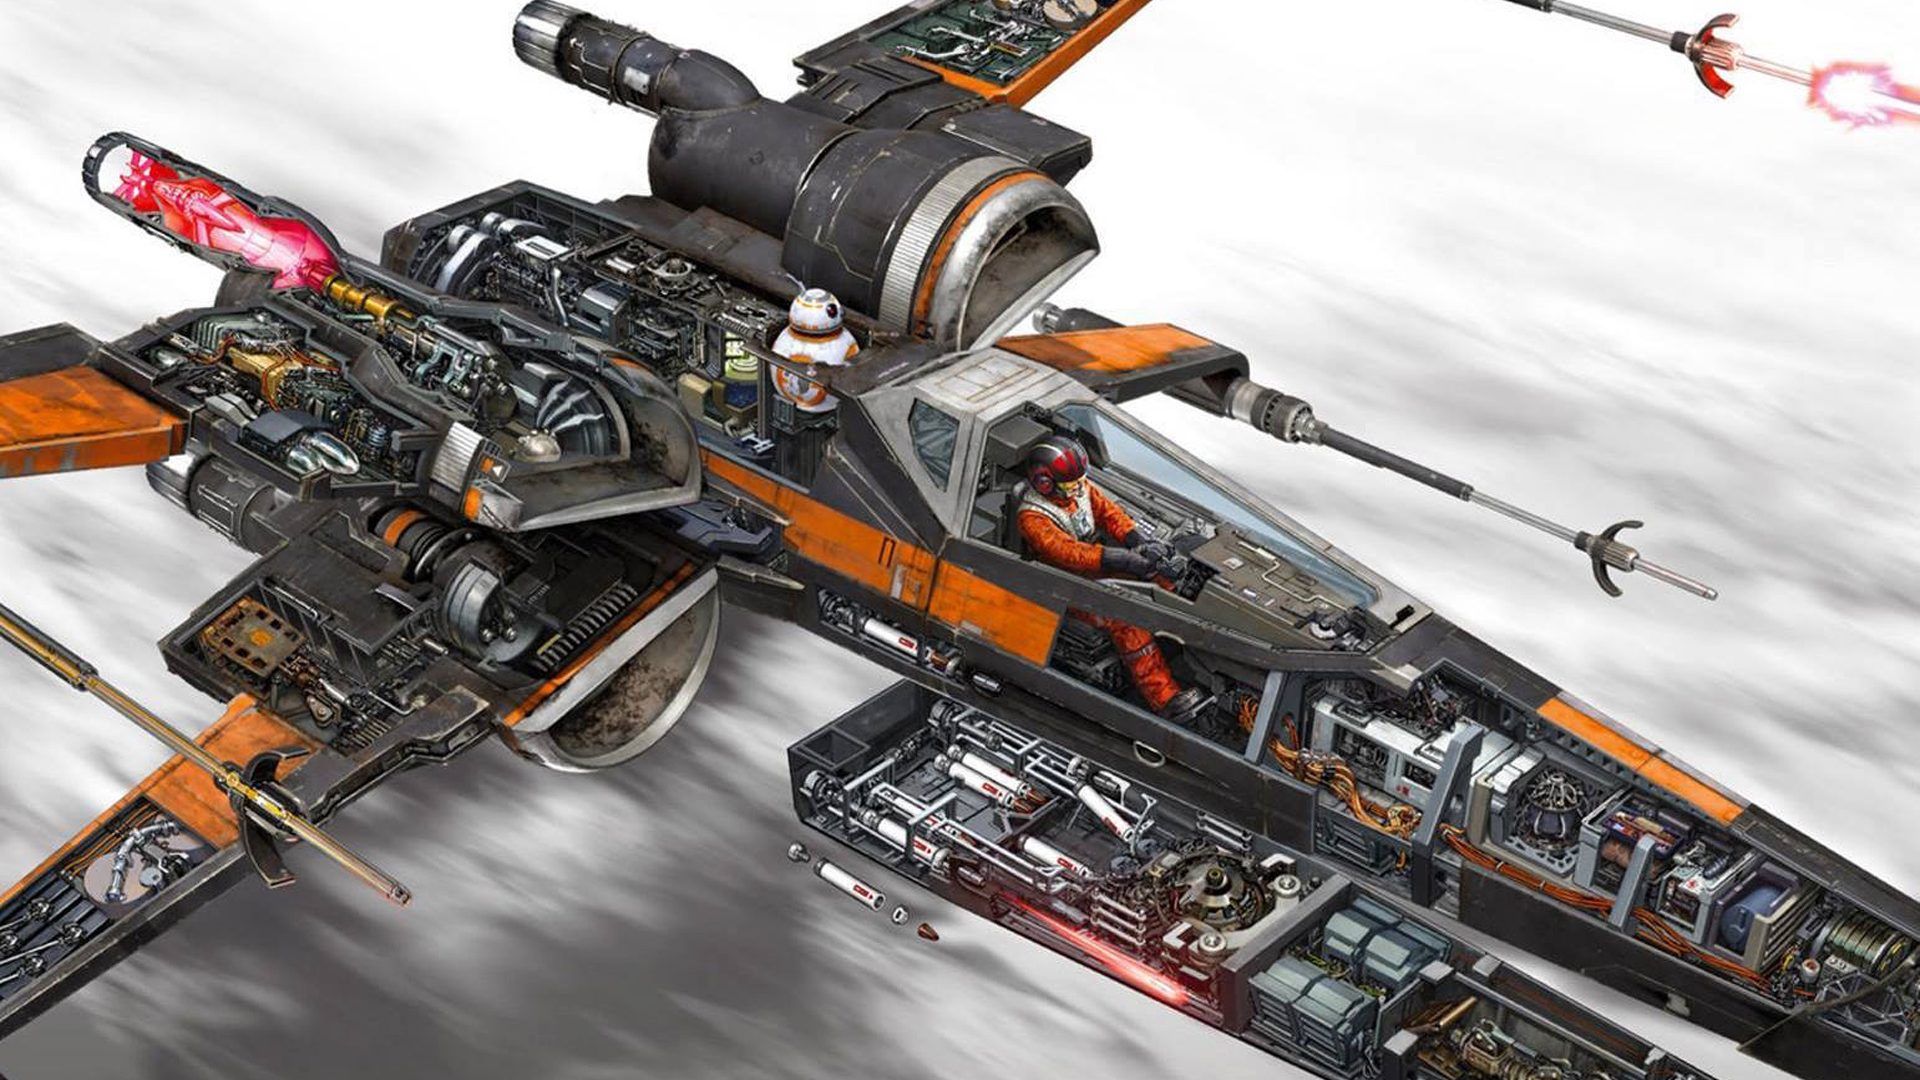 Spaceships And Vehicles X Wing Fighter In The Series Star Wars Desktop Wallpaper HD 1920x1200, Wallpaper13.com